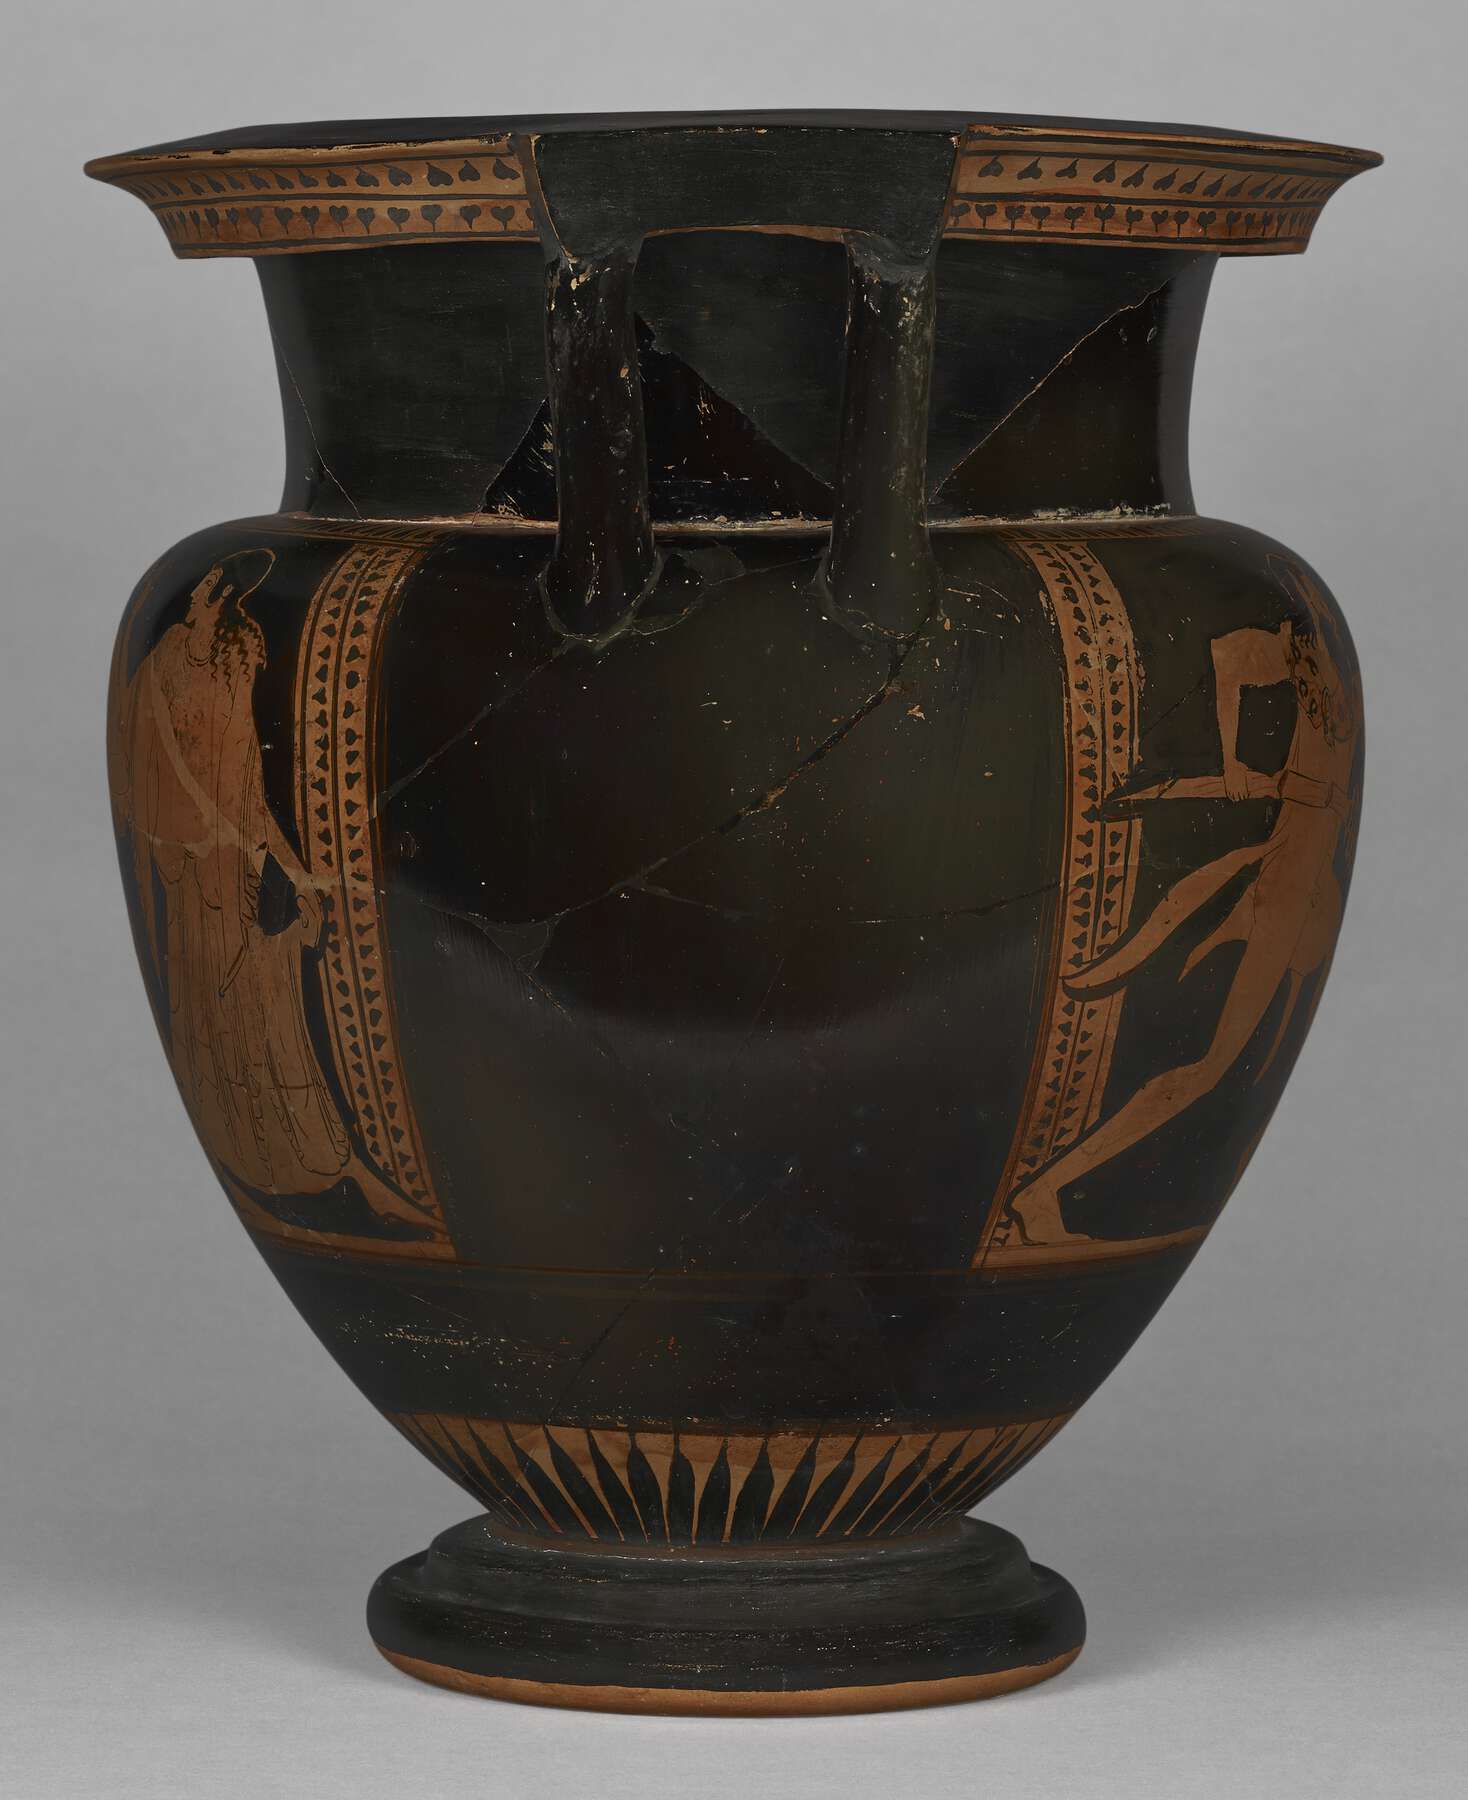 One side of the vase